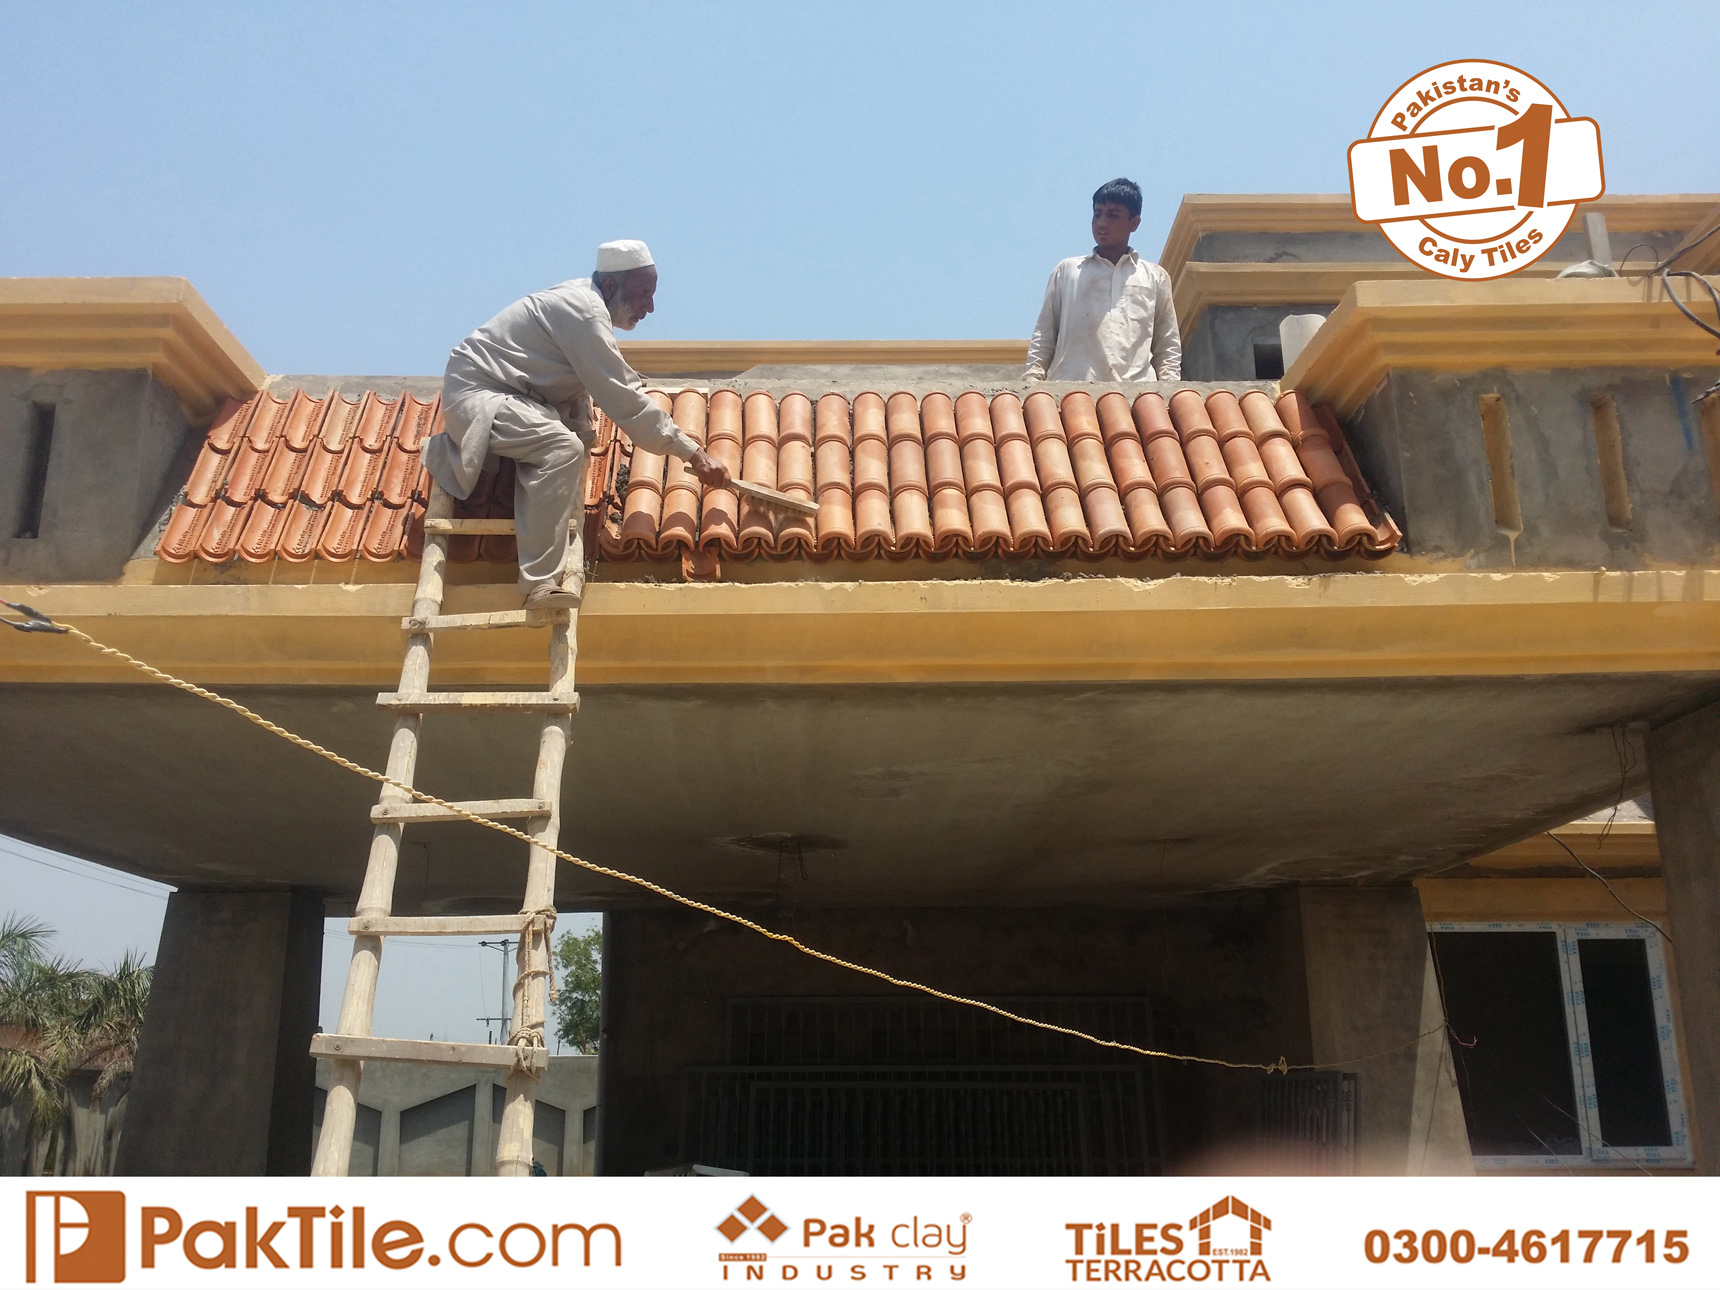 1 Khaprail Tiles in Karachi Pakistan How to Tell the Difference Between Clay and Concrete Toof Tiles Images